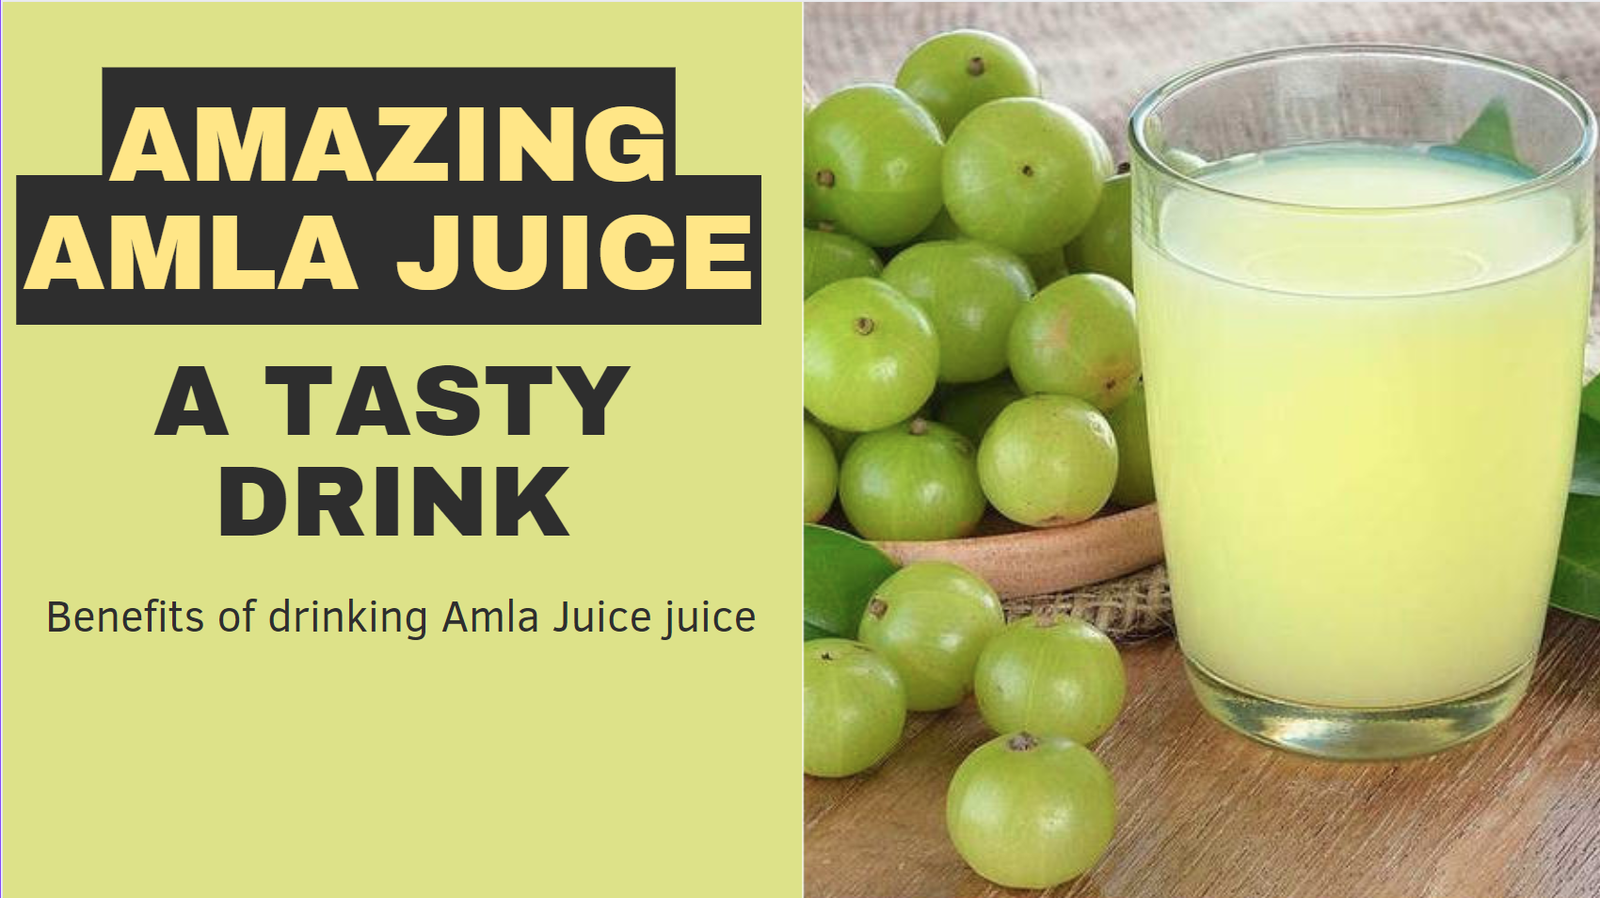 The Amazing Amla Juice A Tasty Drink That's Super Good for You